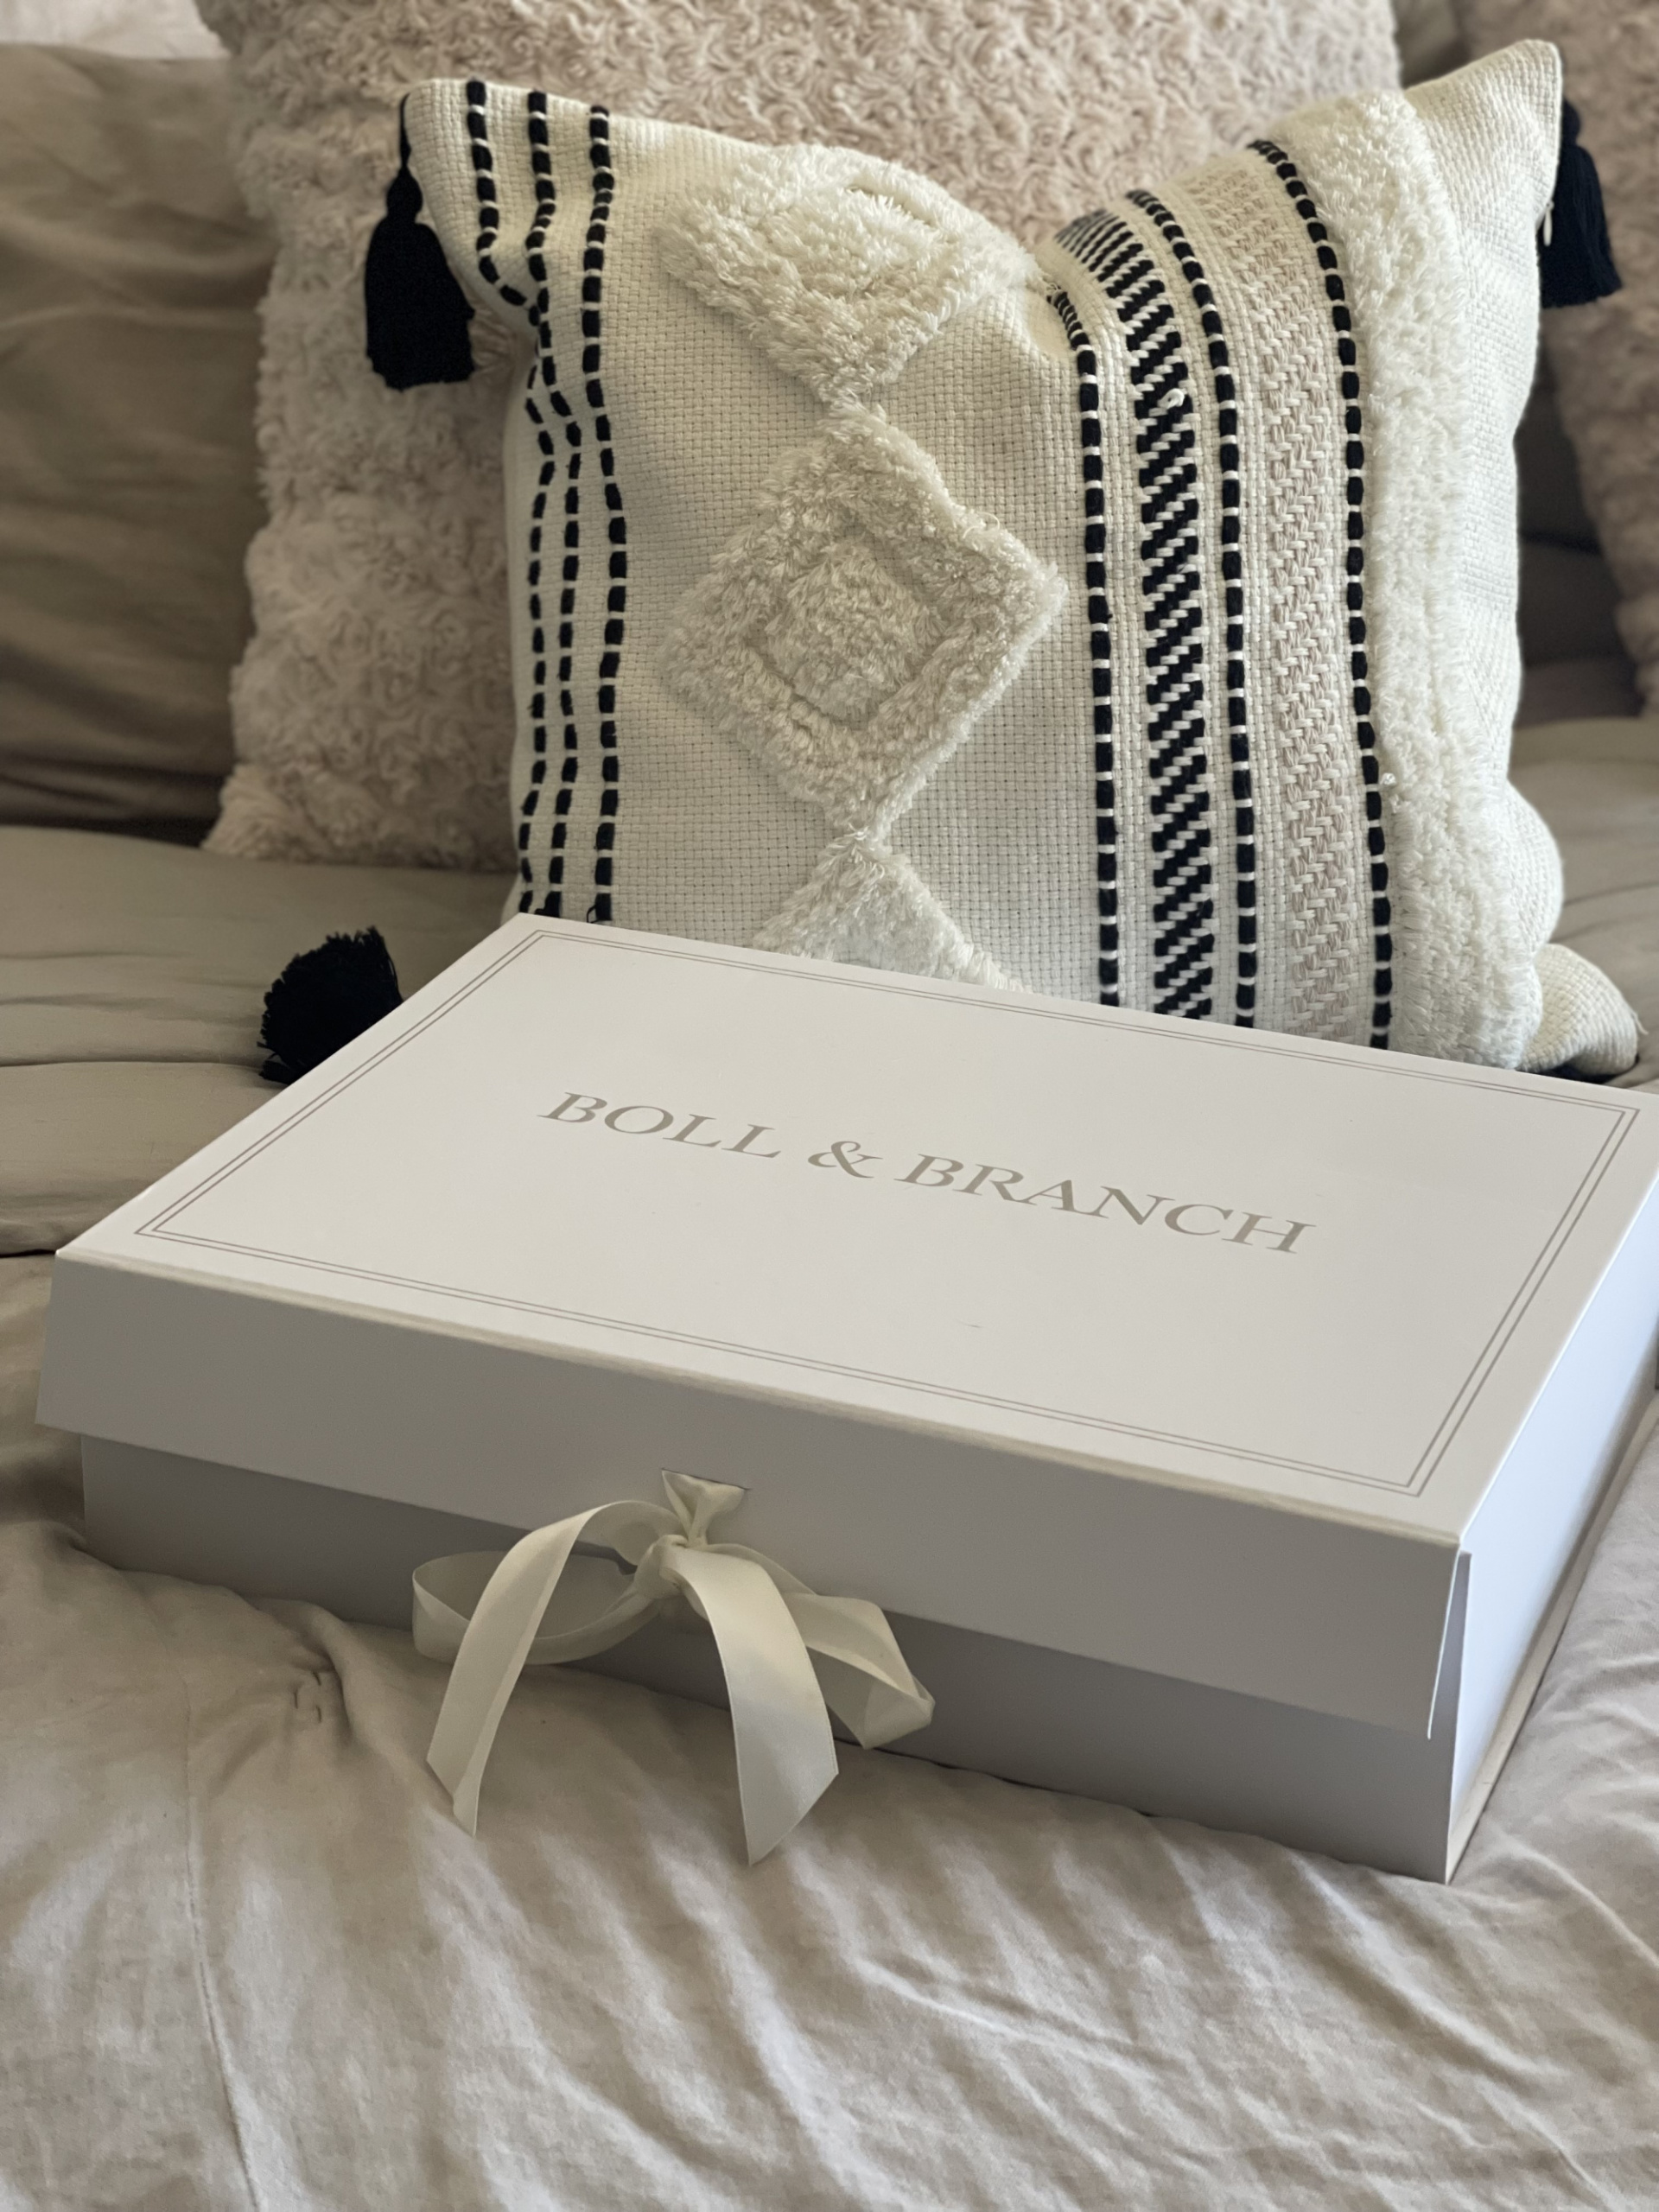 My Honest Review of Boll & Branch Bedding. Is It Really THAT Good?